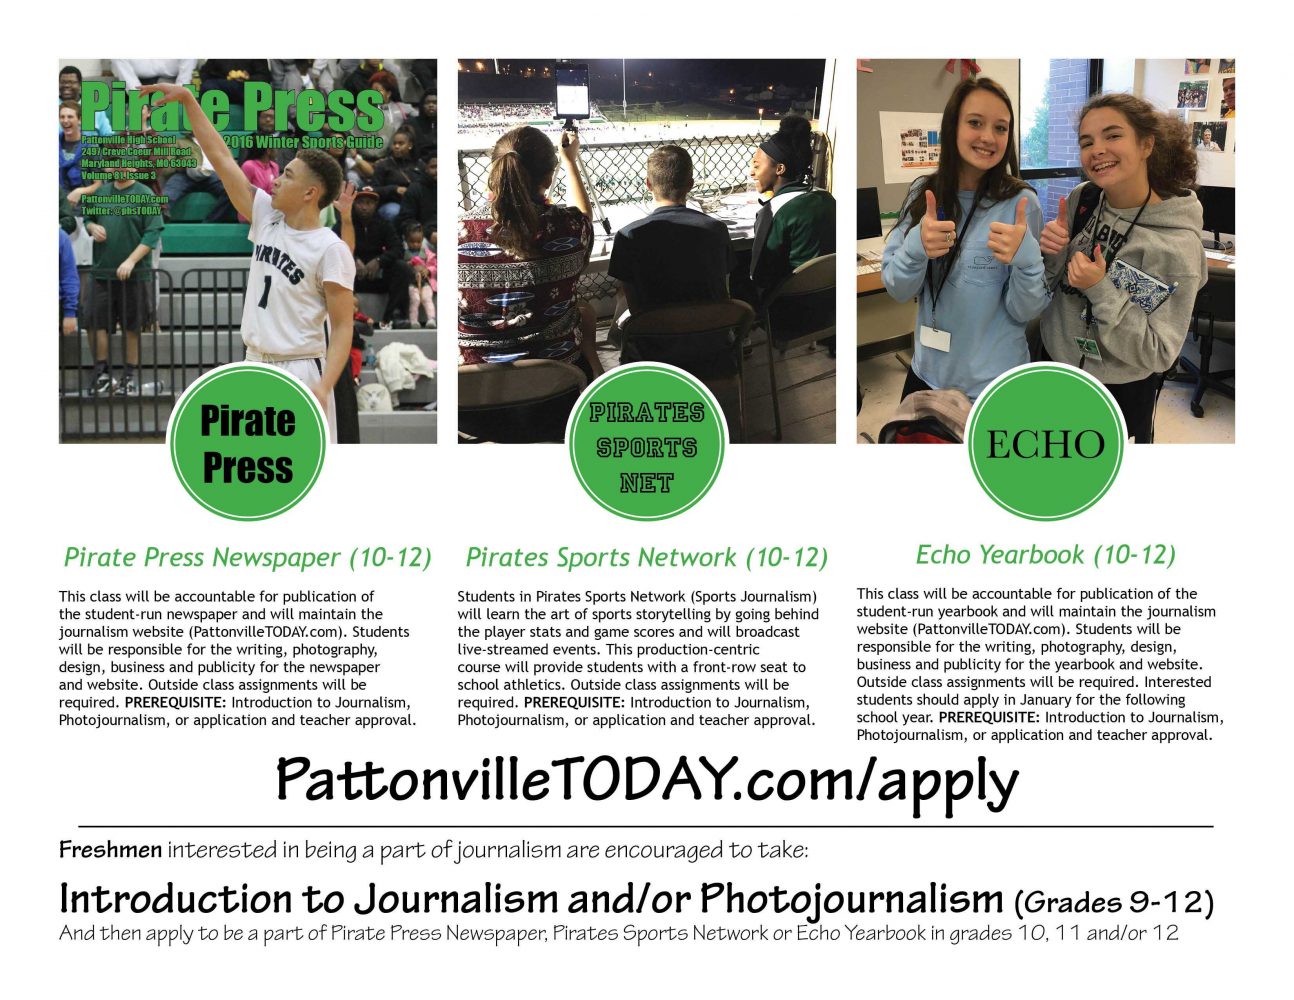 Apply now to be a part of the 2017-2018 Pattonville journalism staff